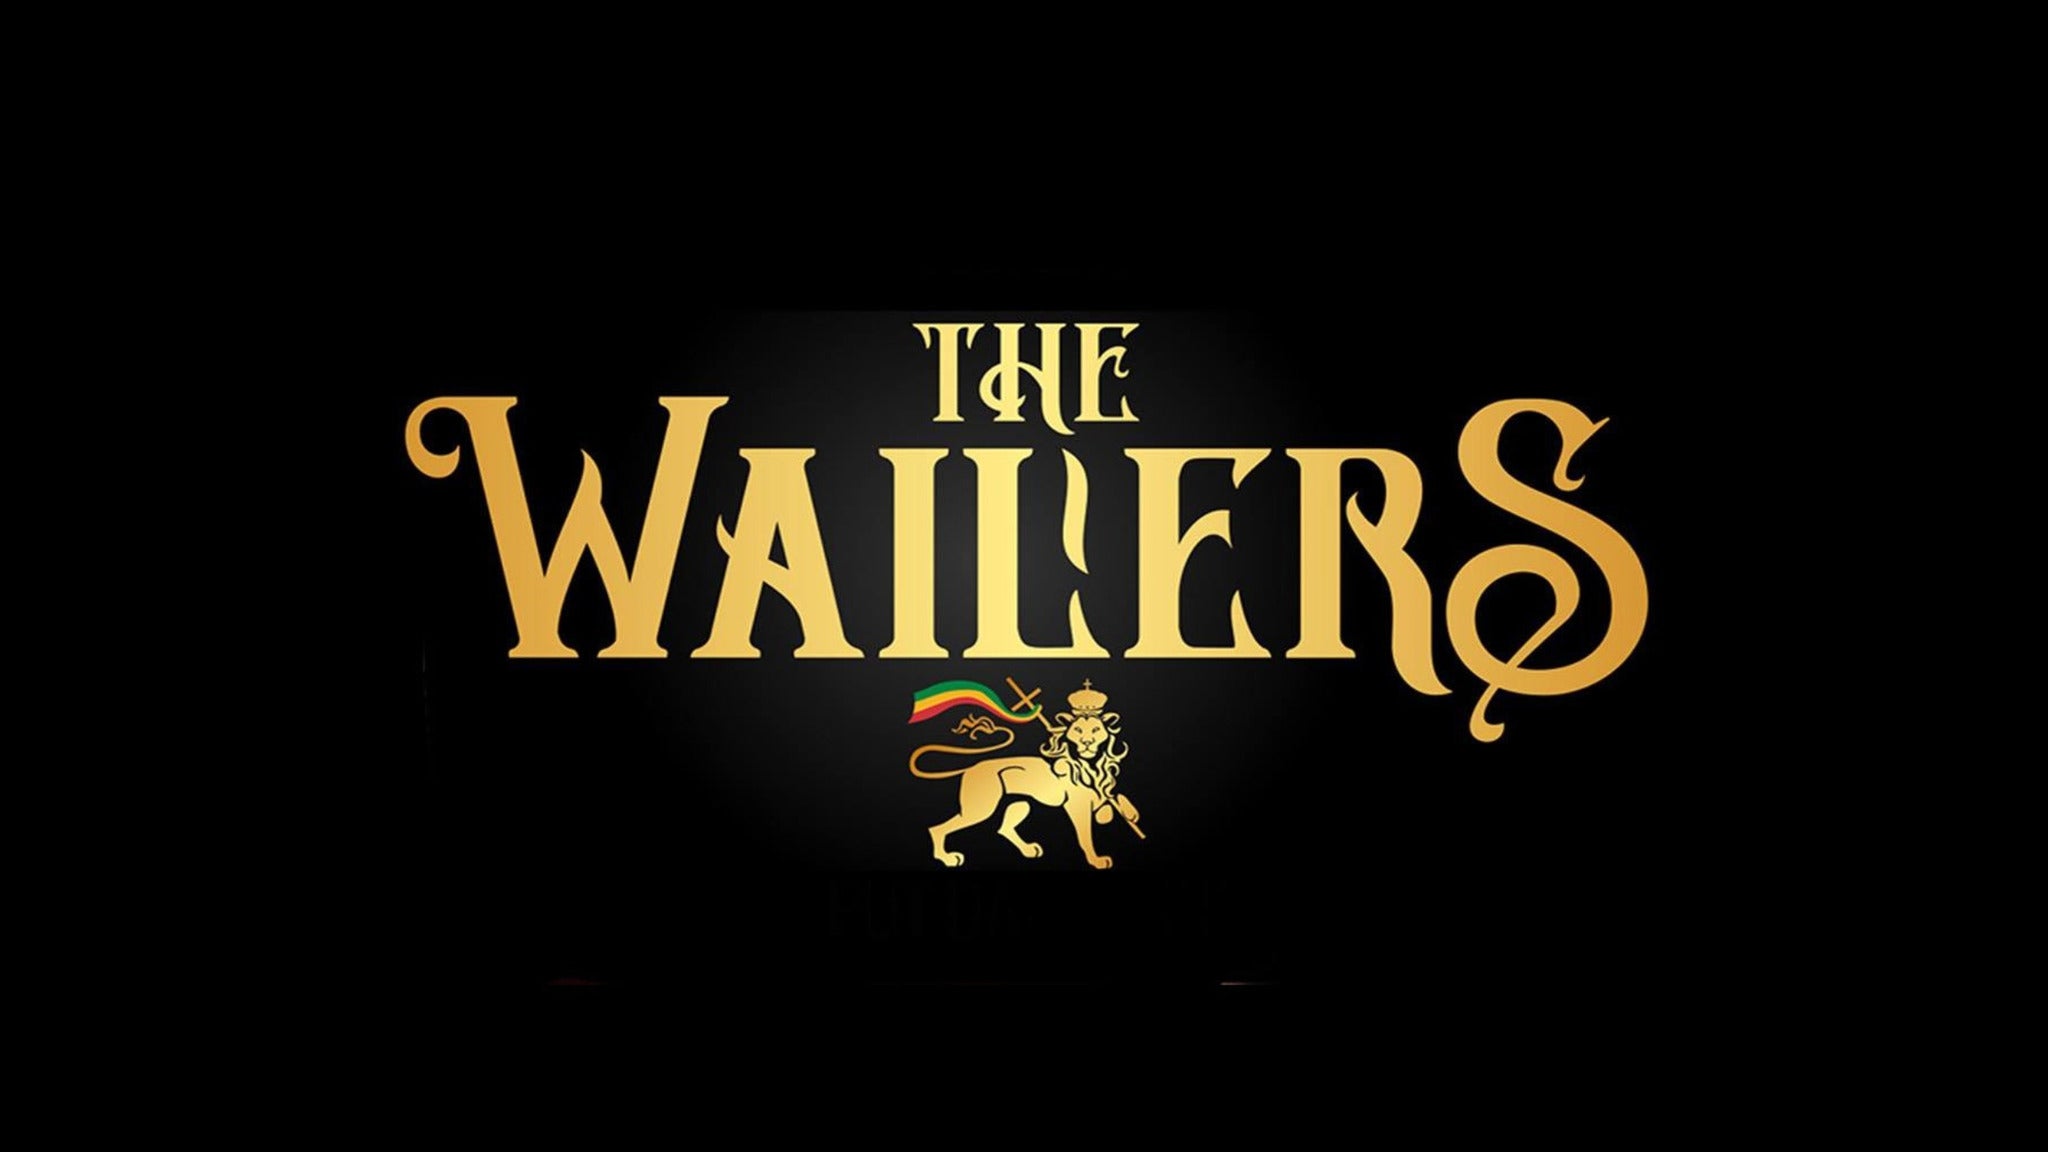 working presale password for The Legendary Wailers advanced tickets in Huntington